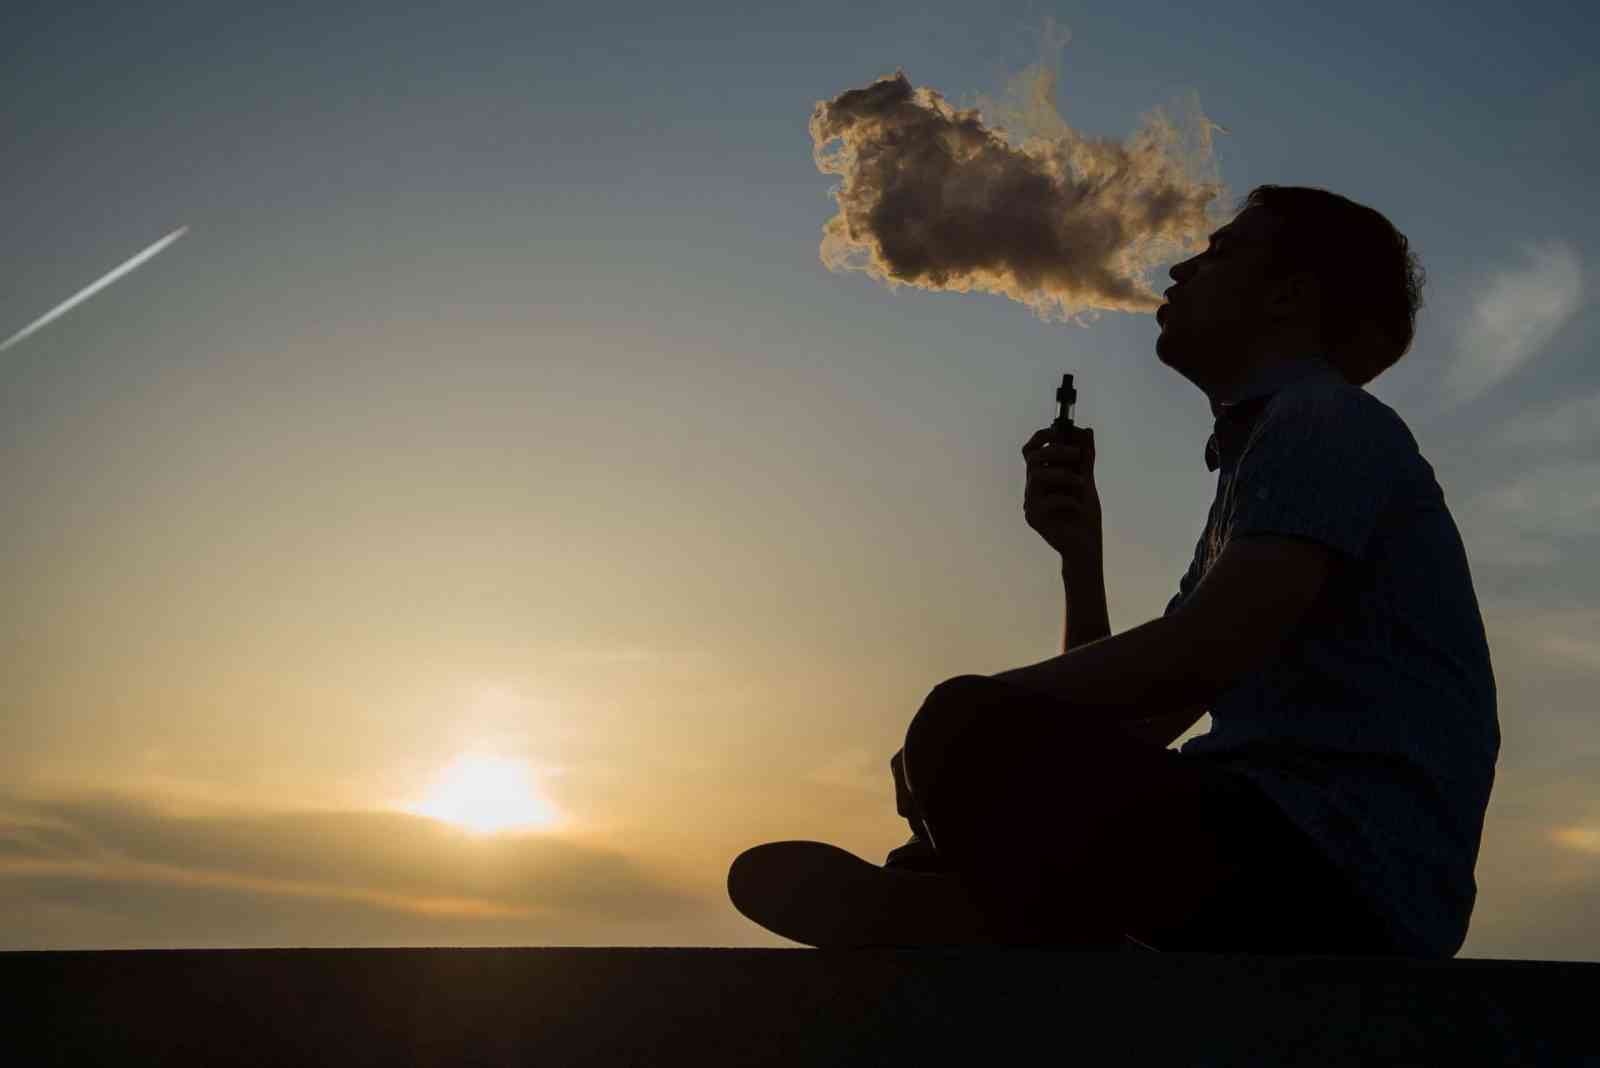 vaping young man with, produces vapor on sunset sky background at the sea coast promenade, place for text.